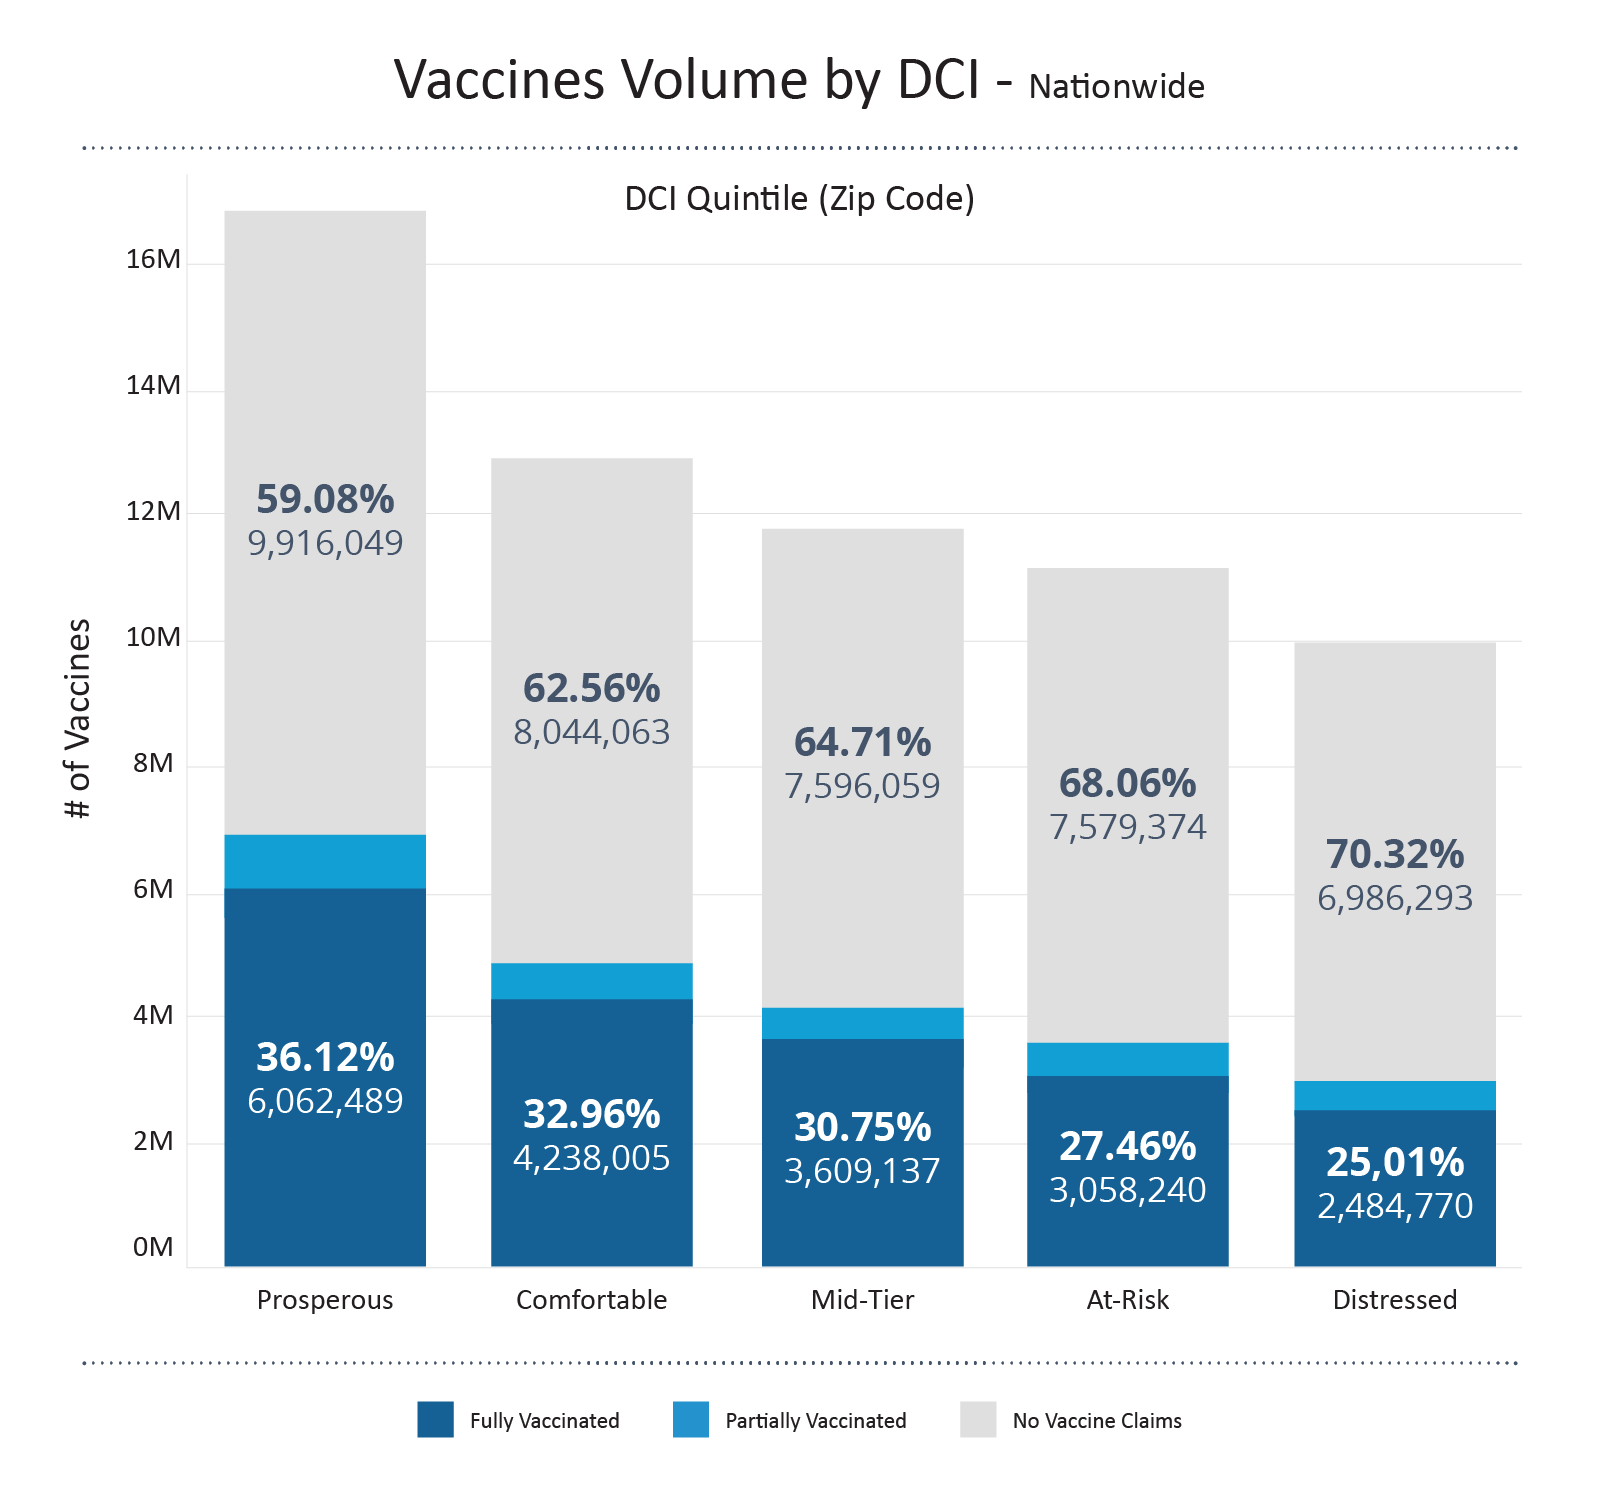 COVID Vaccine Volume by DCI